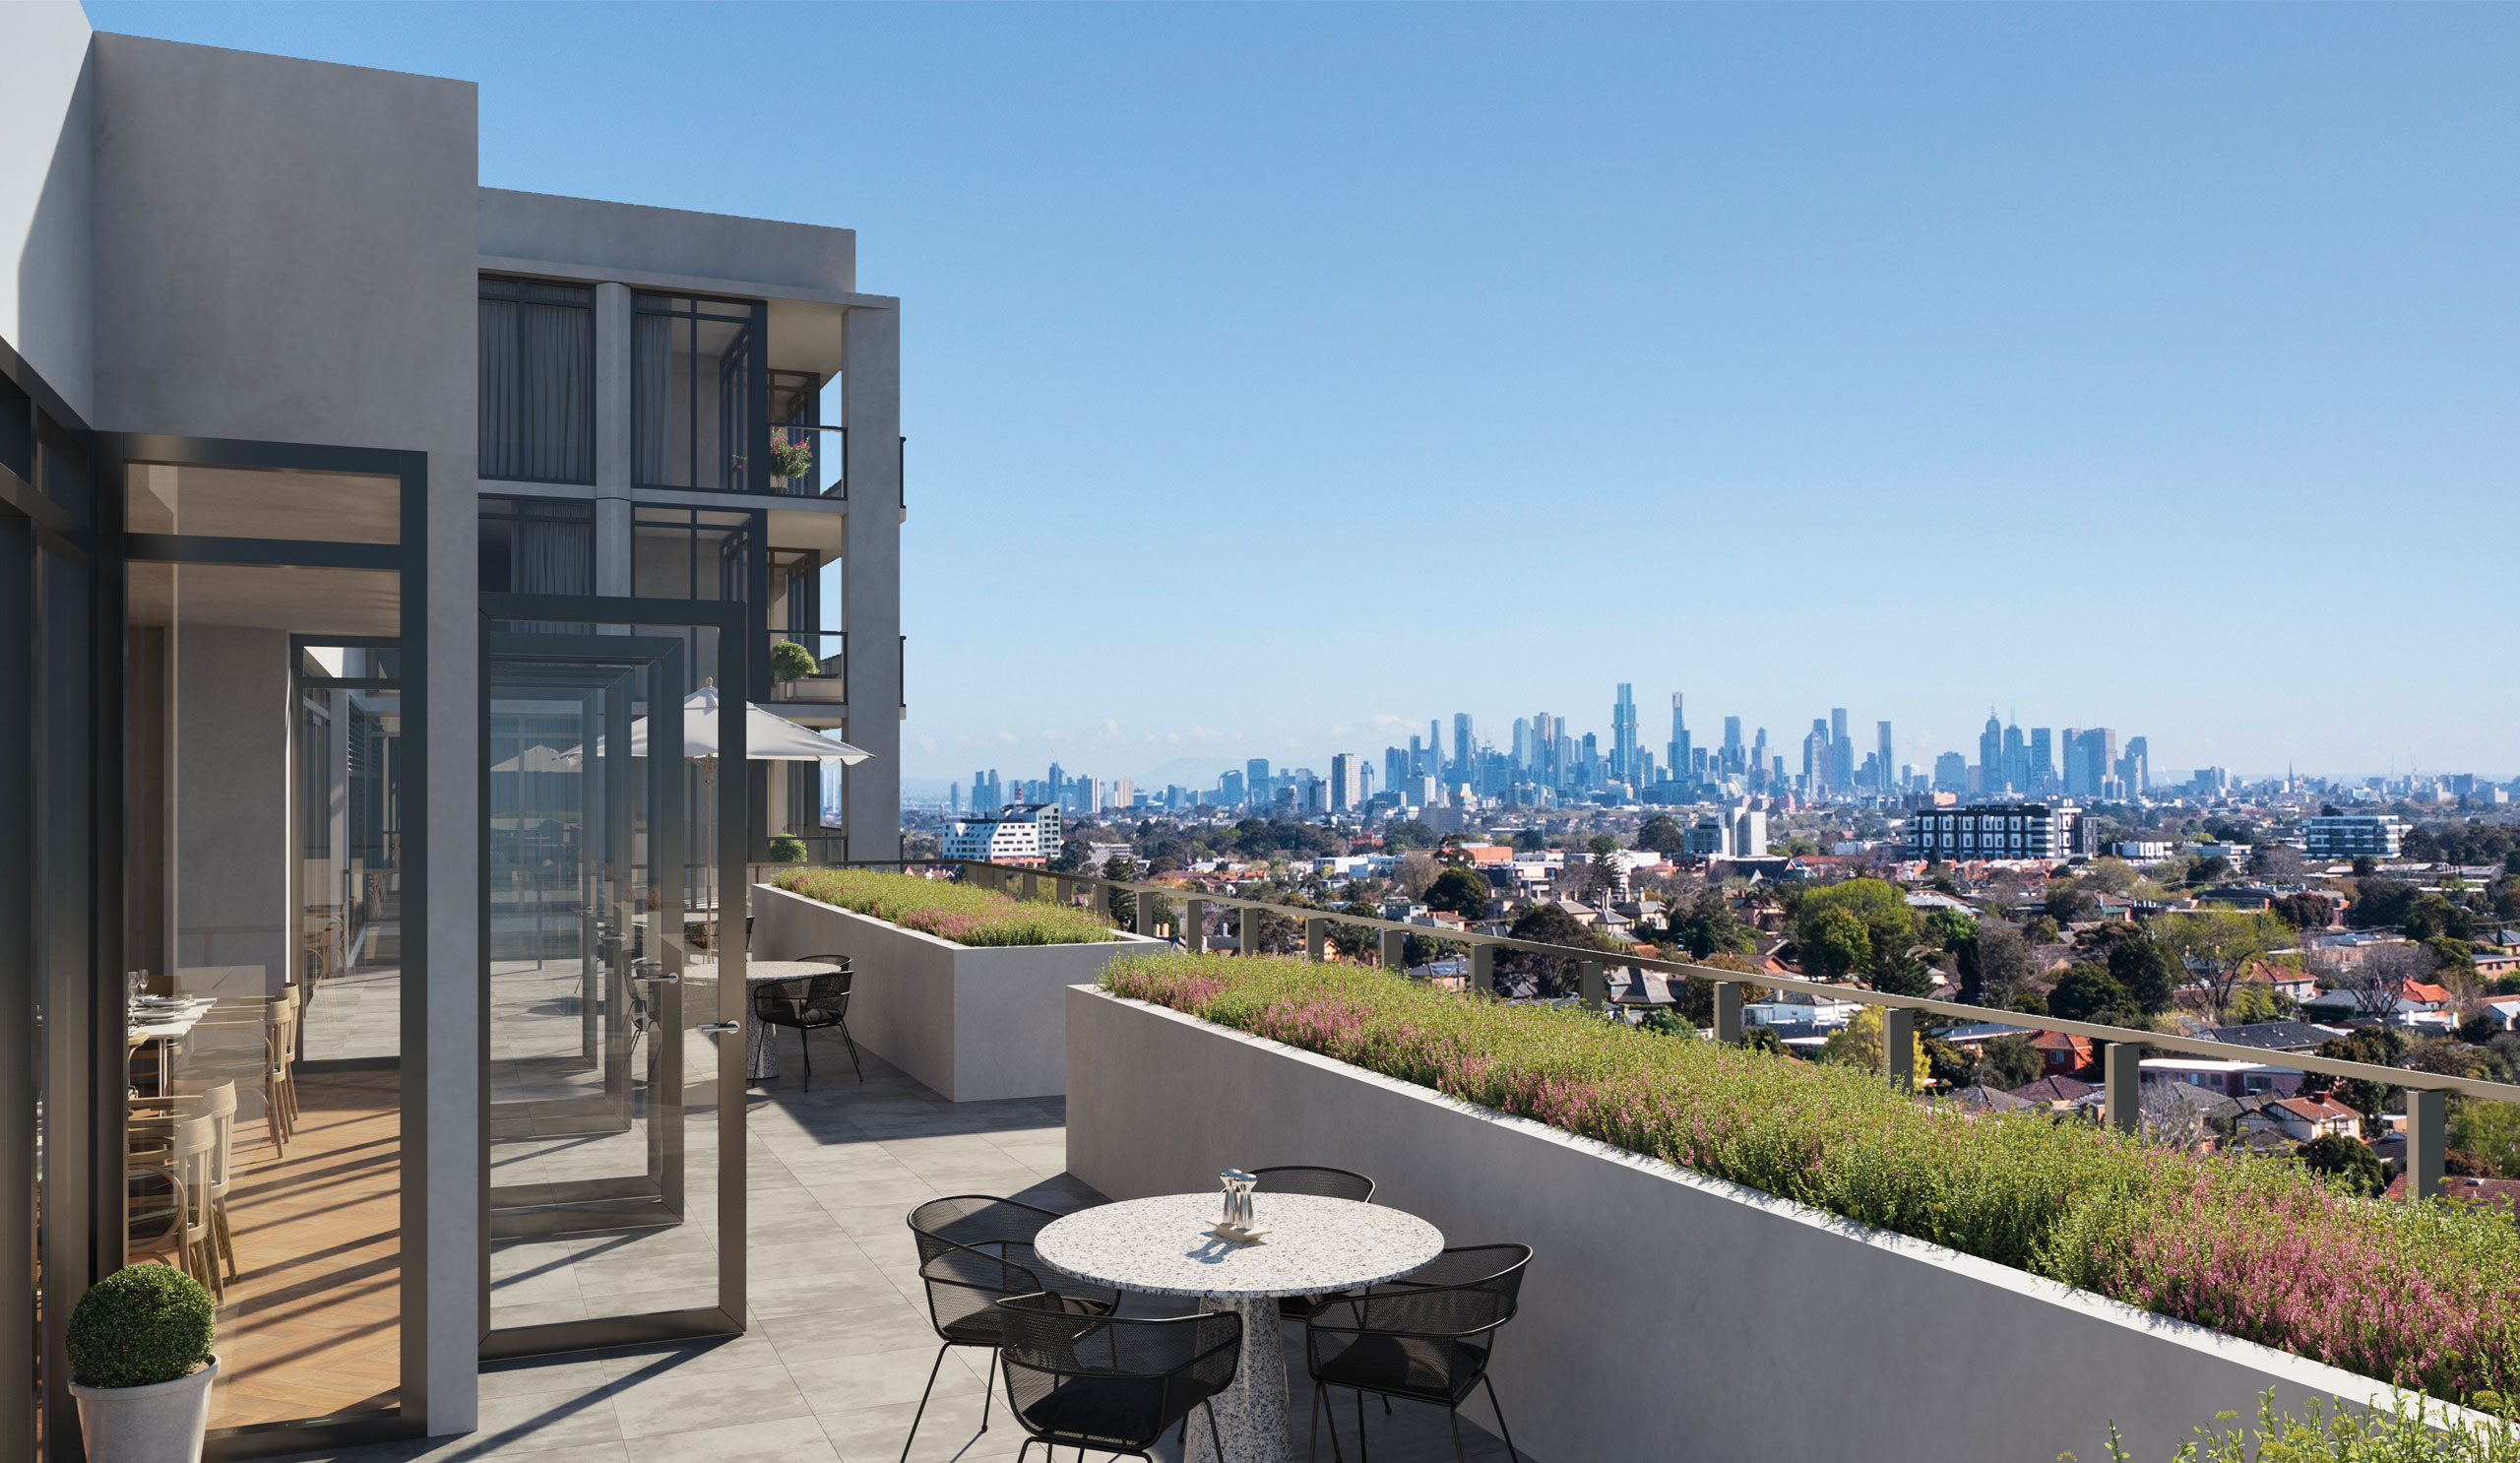 Take in the panoramic views from the rooftop terrace <br> - artist impression